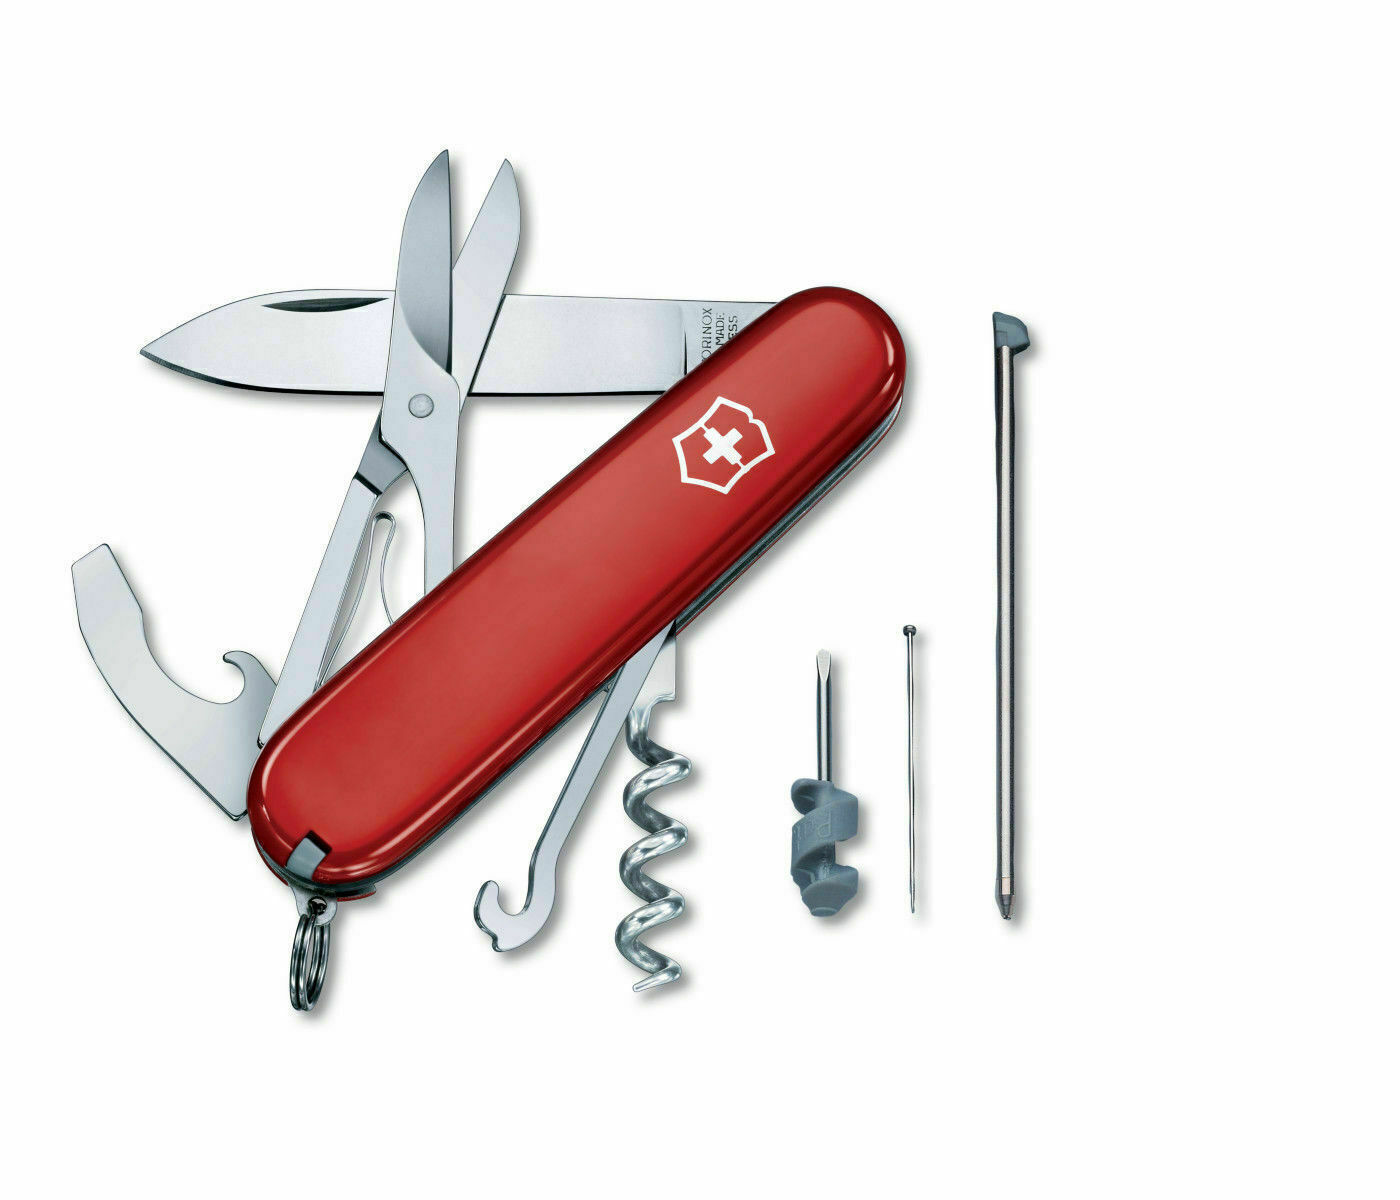 New Victorinox Swiss Army 91mm Knife  COMPACT  in Red   1.3405-X1  54941